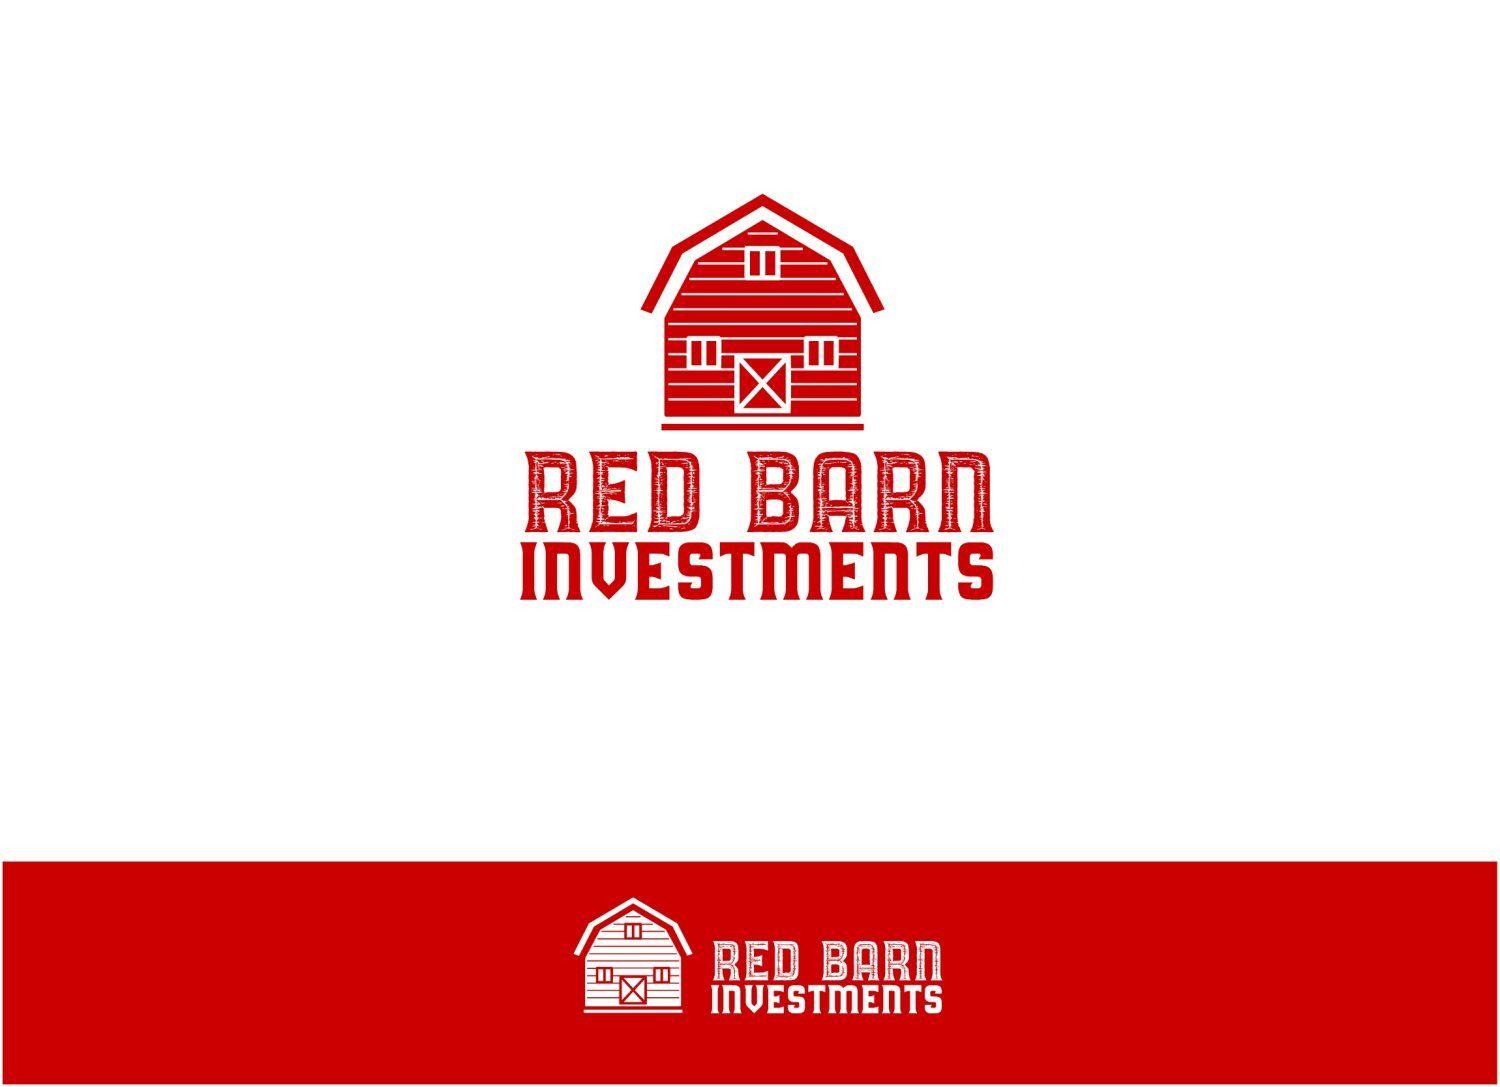 Red Finance Logo - Playful, Modern, Finance Logo Design for Red Barn Investments, LP by ...